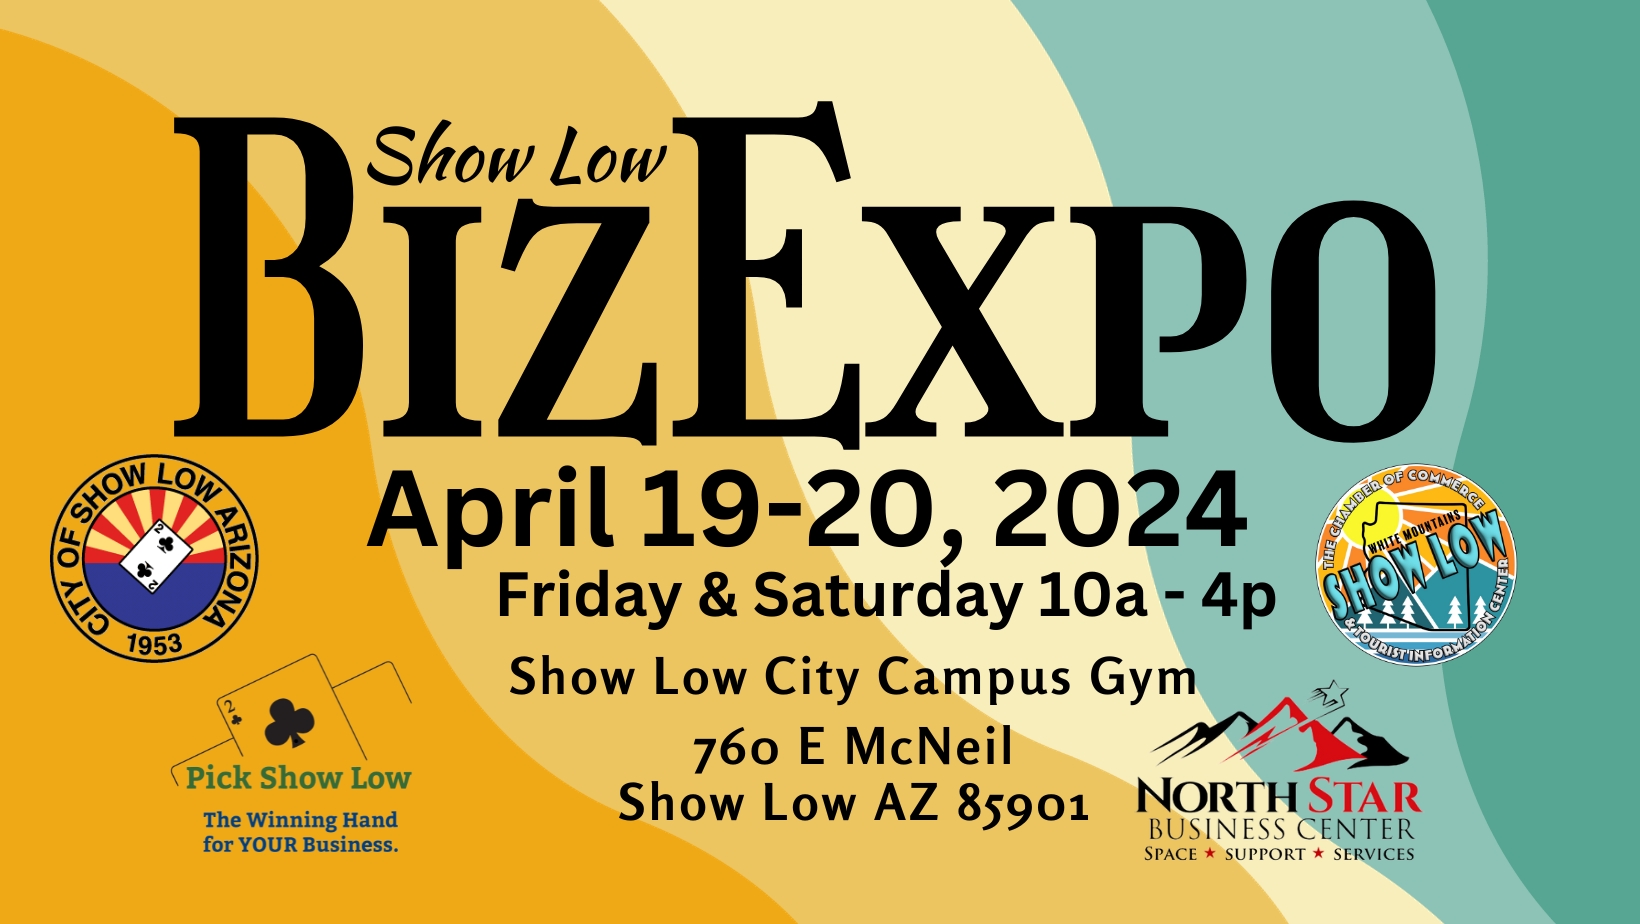 2024 Show Low BizExpo cover image